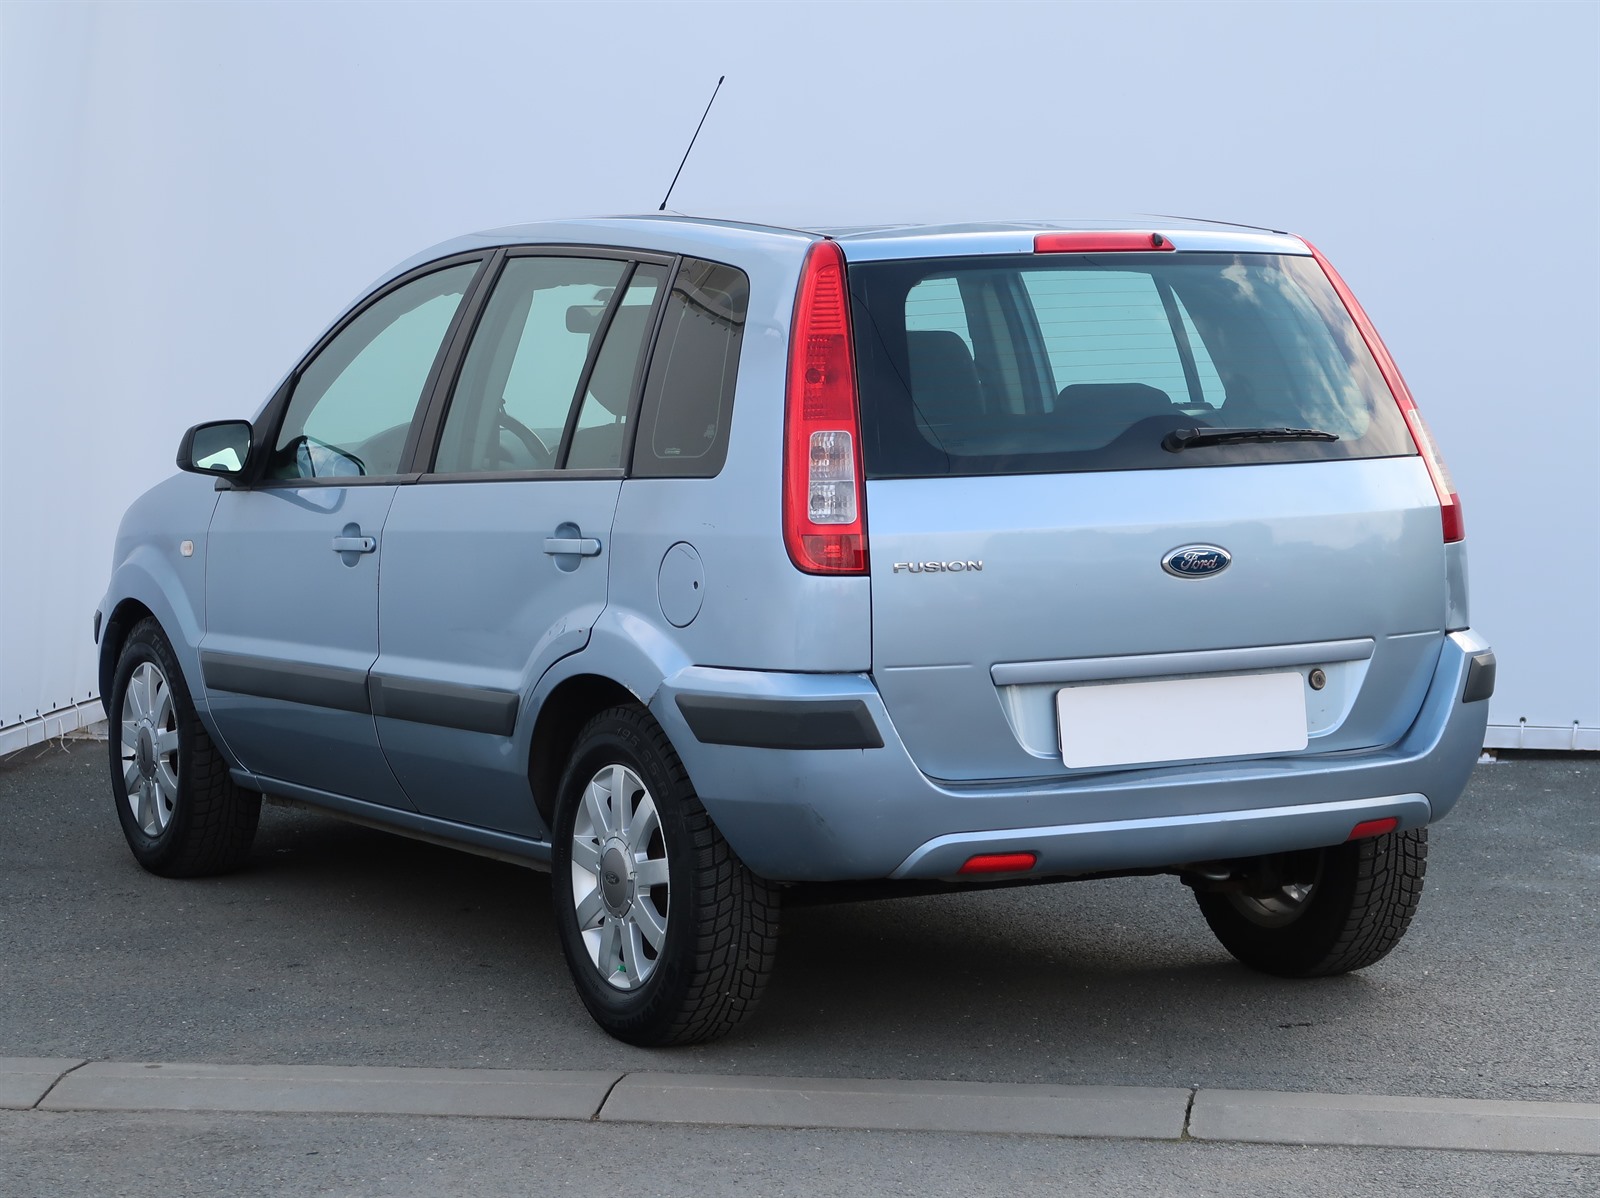 Ford Fusion, 2008 - pohled č. 5